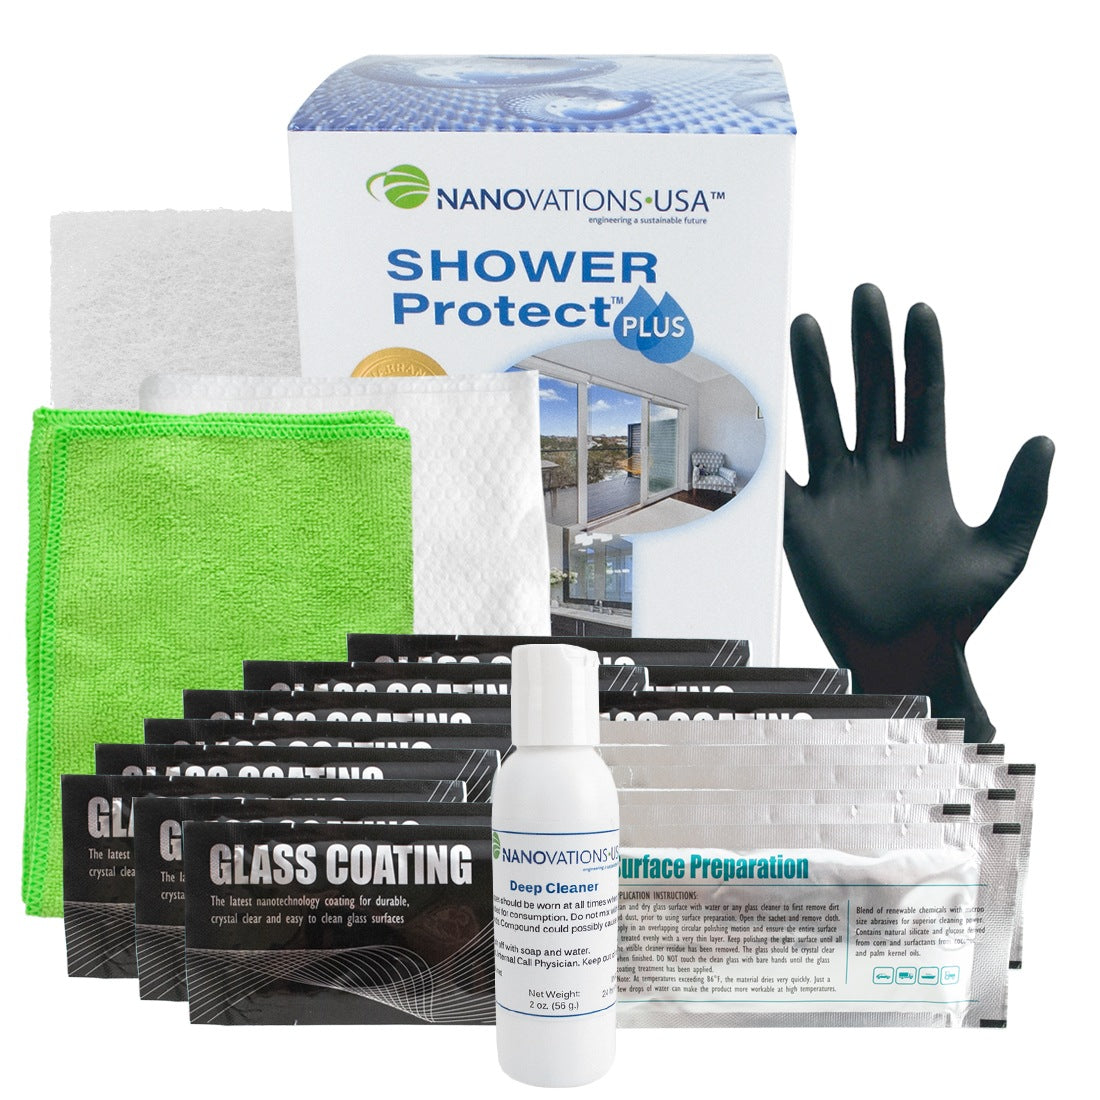 Nanovations Shower Protect Plus Kit Complete View